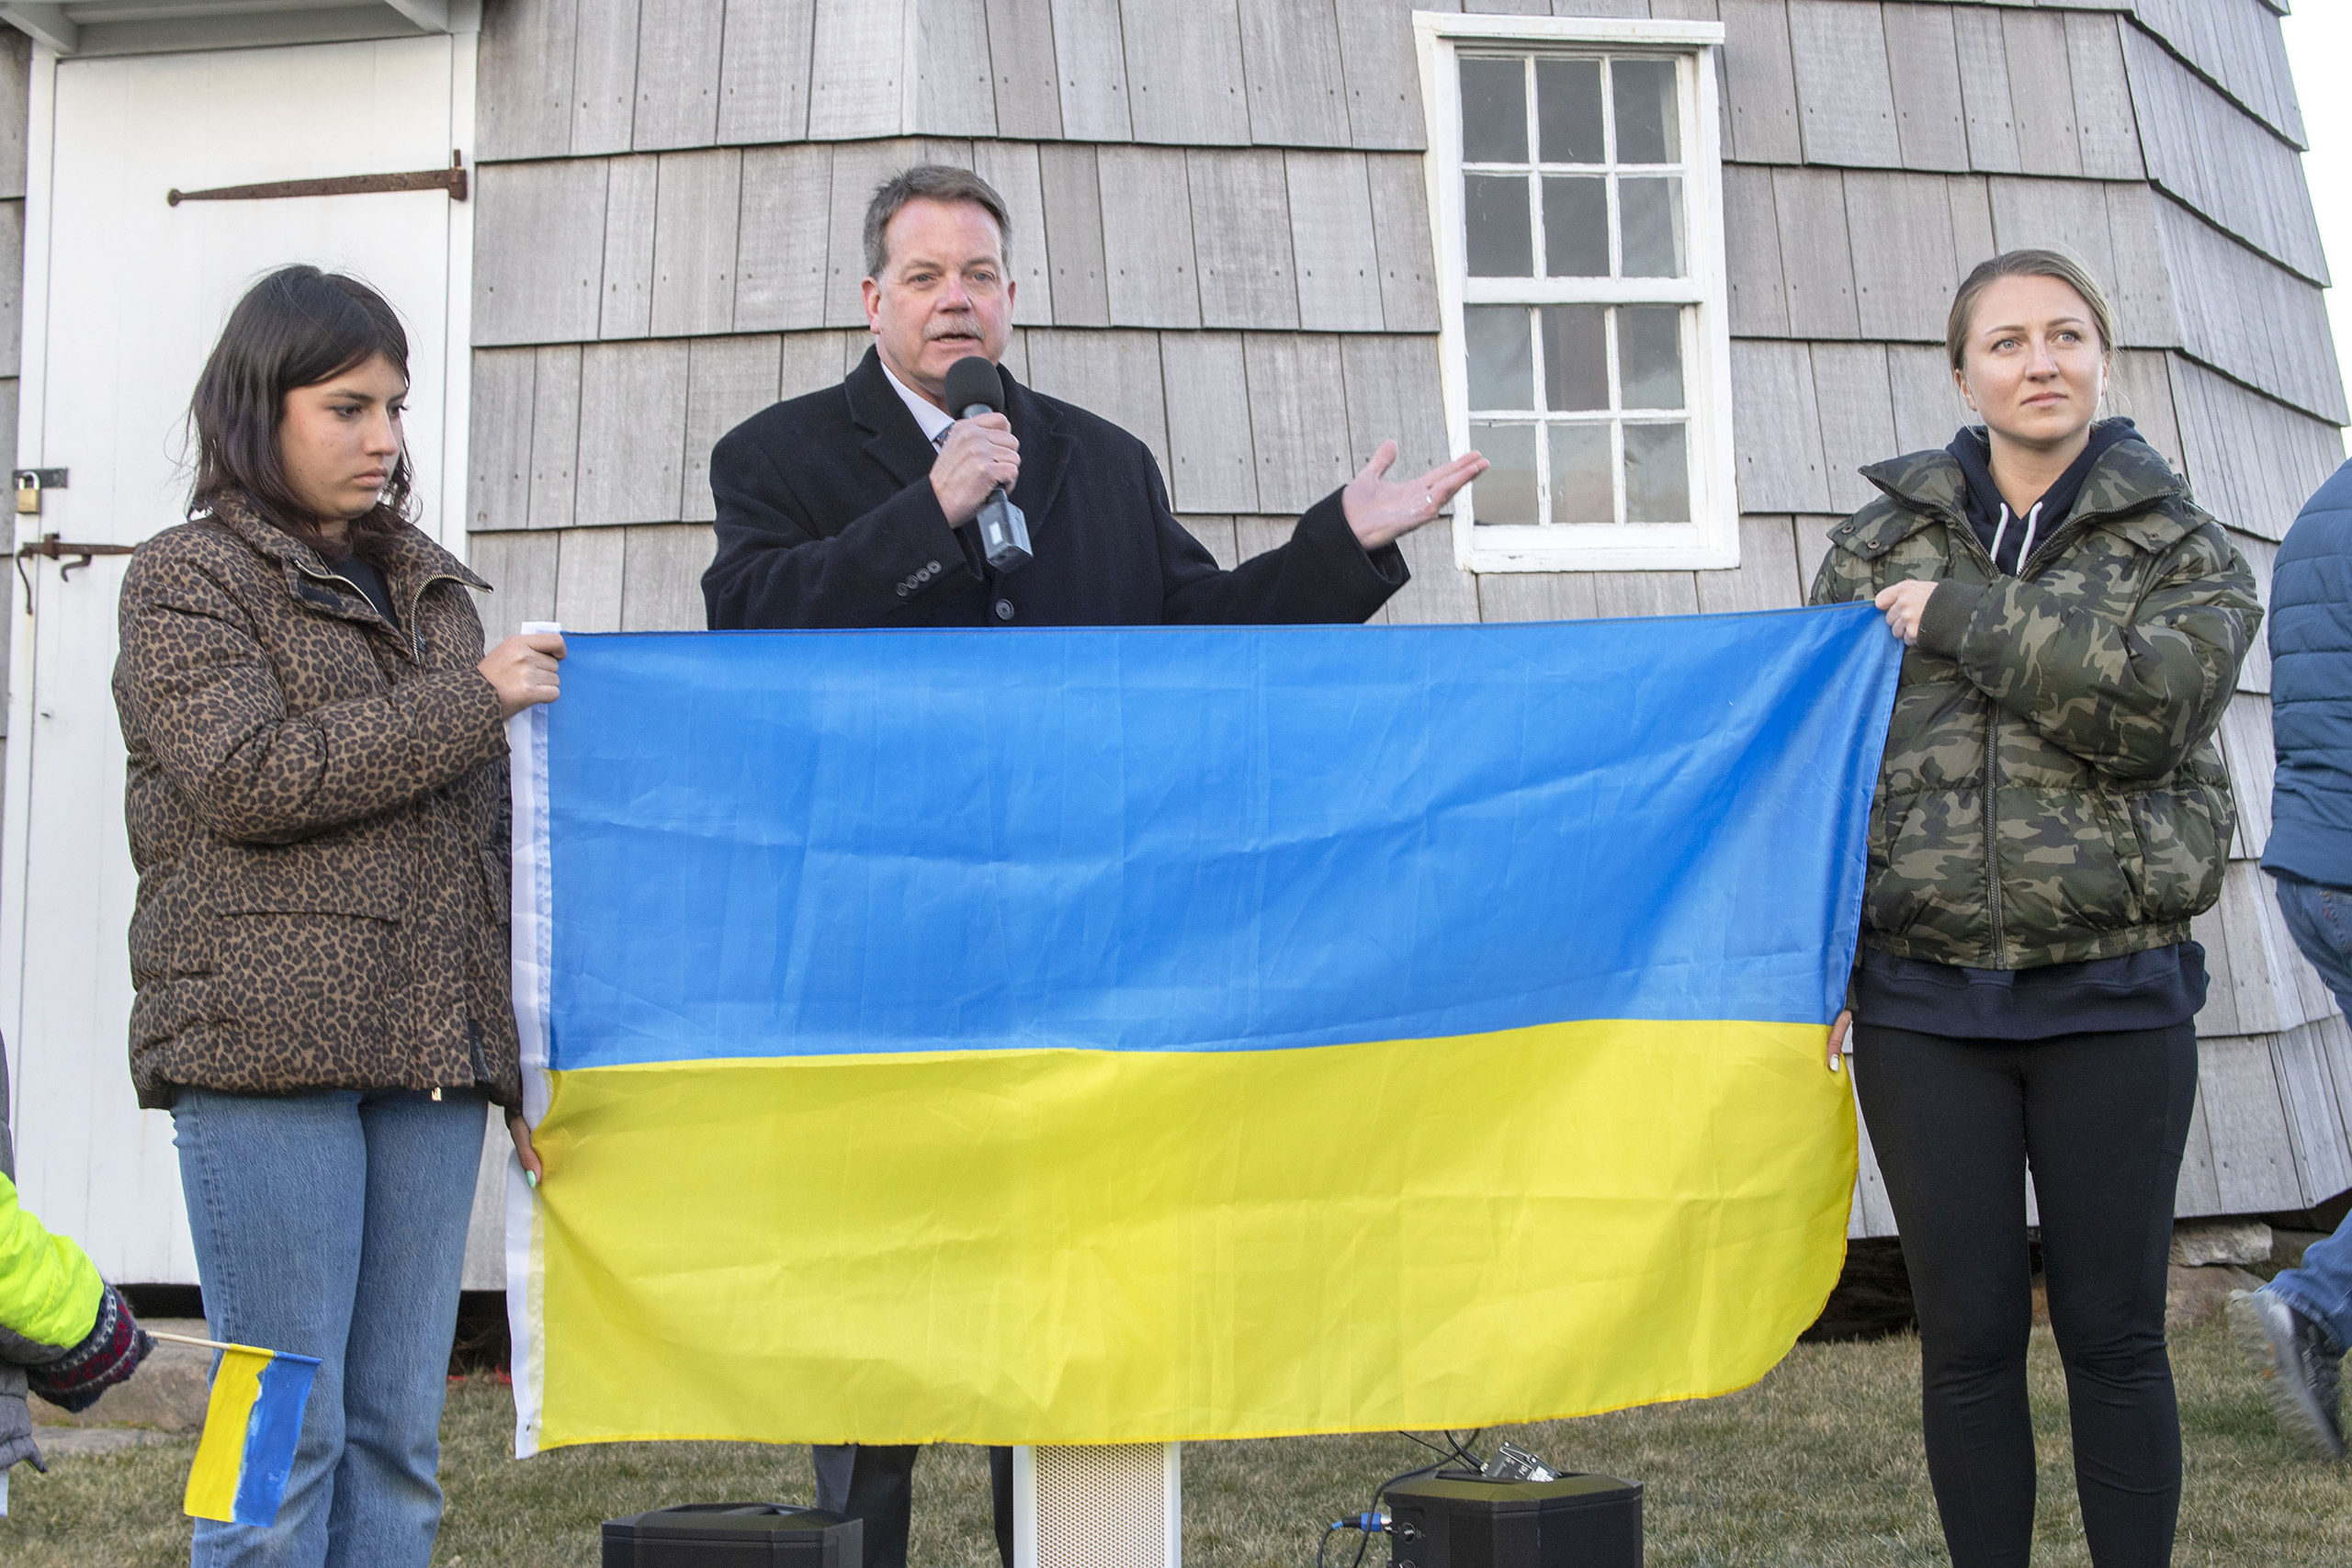 East Hampton Village Mayor Jerry Larsen speaks as Anya Bimson, right, and her daughter, Vira Palamarchuk, whose father is fighting on the front lines in Ukraine, hold up a Ukrainian flag during a rally last Thursday on the Hook Mill Village Green in East Hampton. MICHAEL HELLER